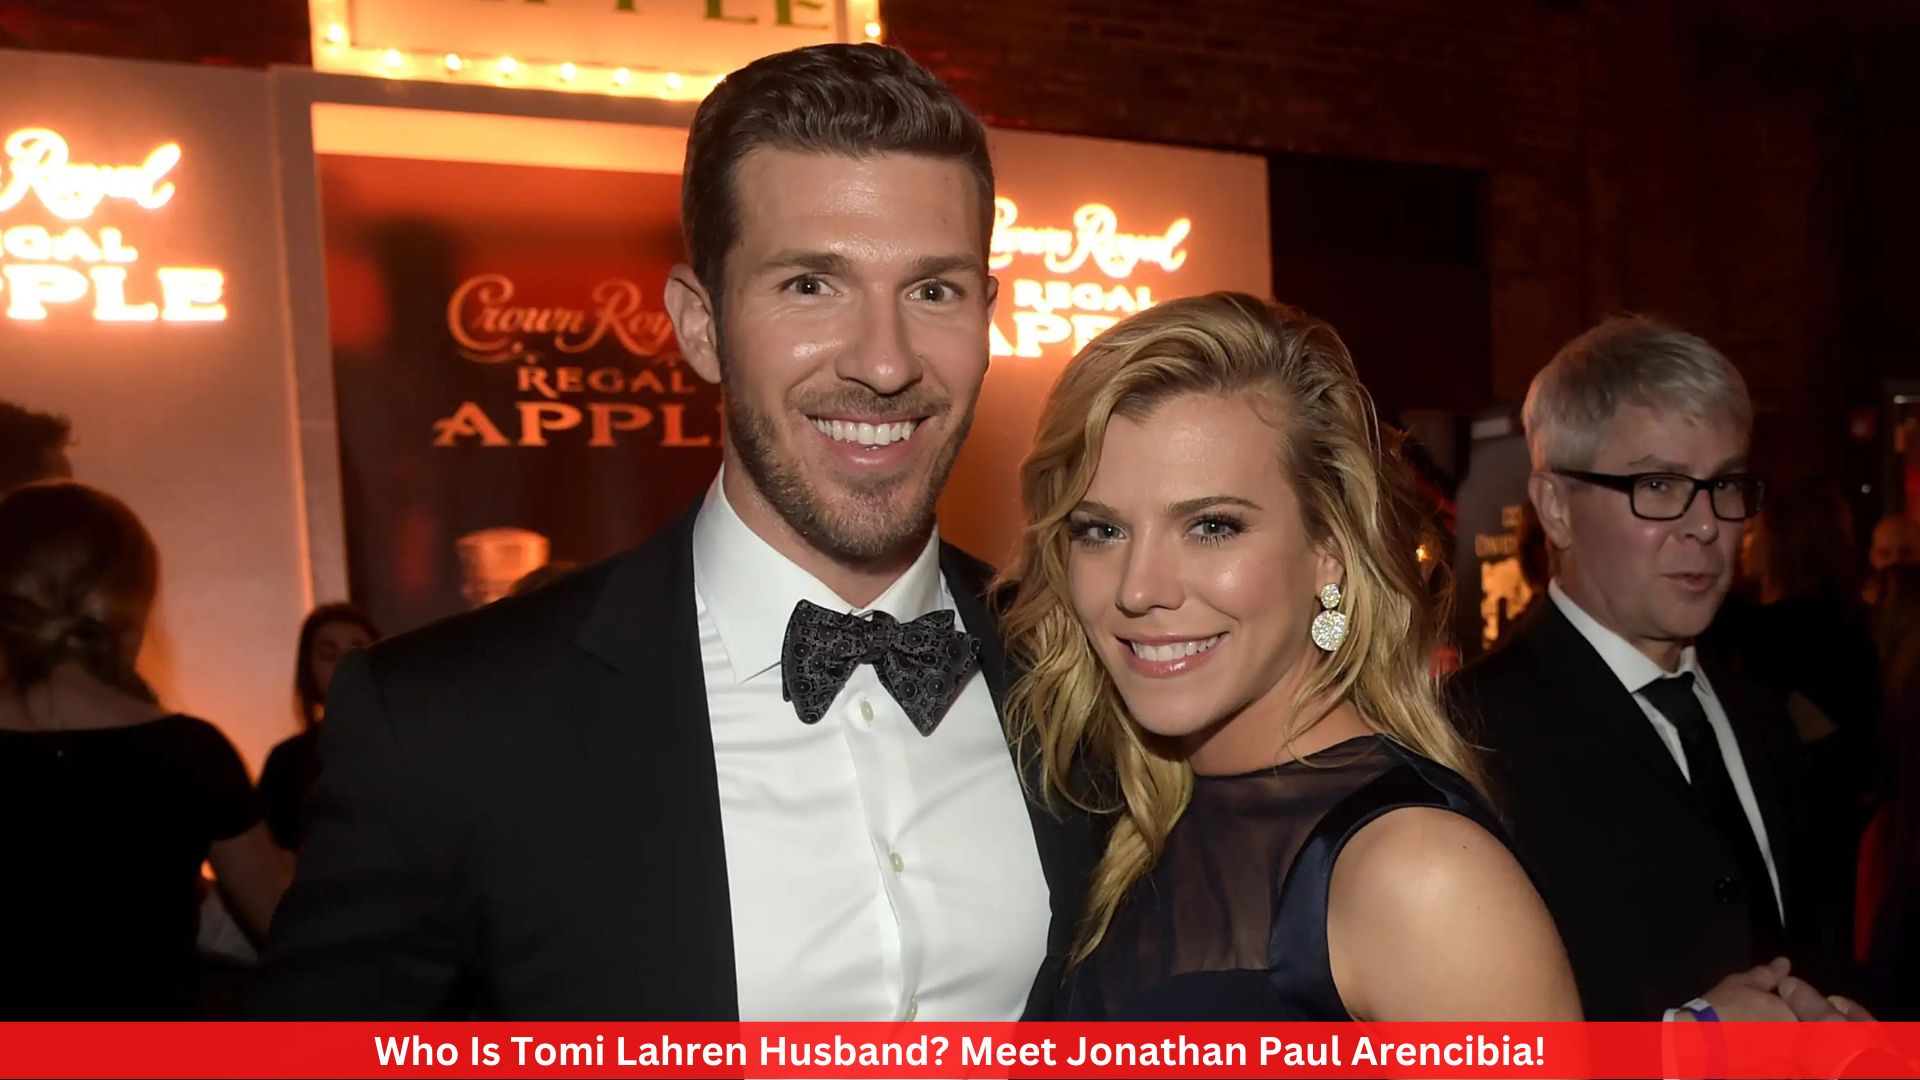 Who Is Tomi Lahren Husband? Meet Jonathan Paul Arencibia!